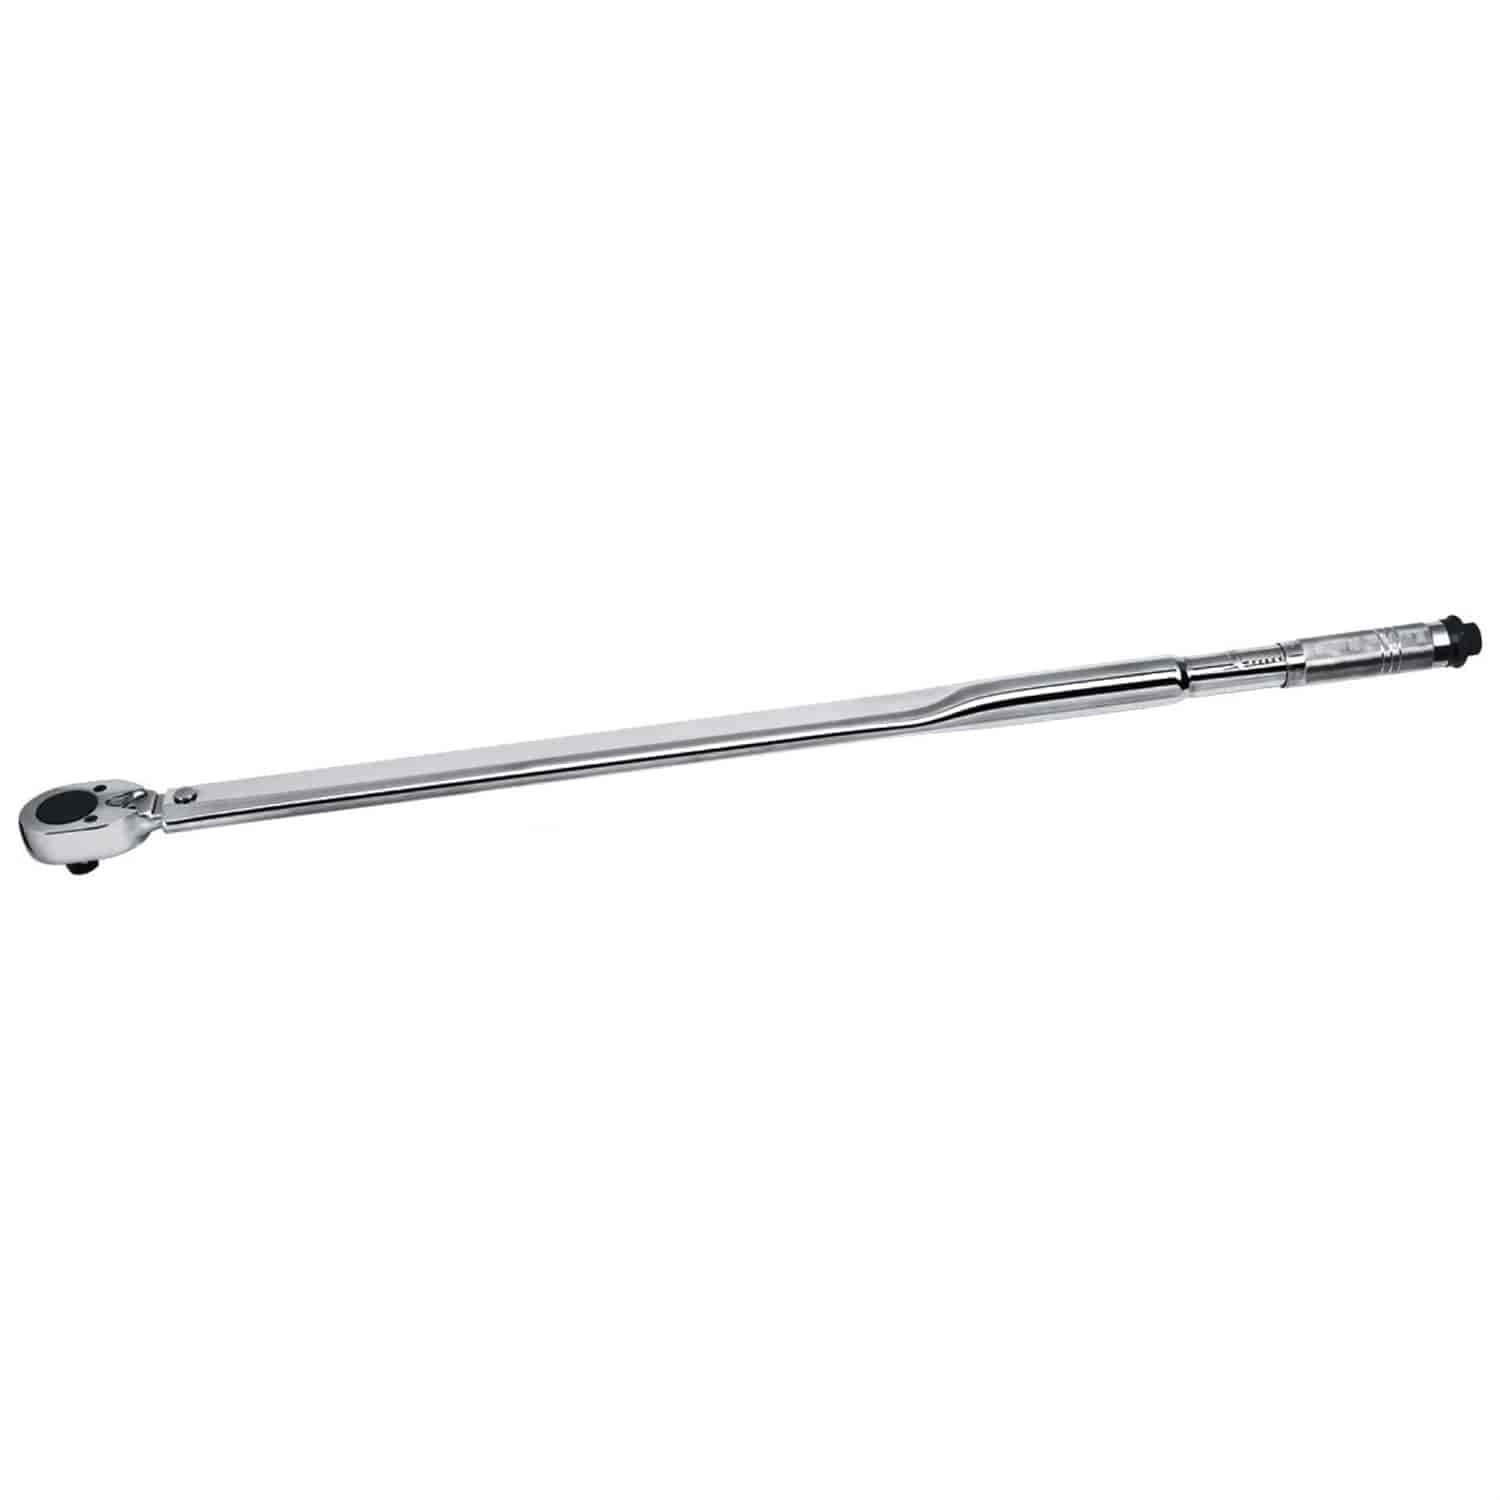 Powerbuilt 641434 3/4" Micrometer Torque Wrench for sale online